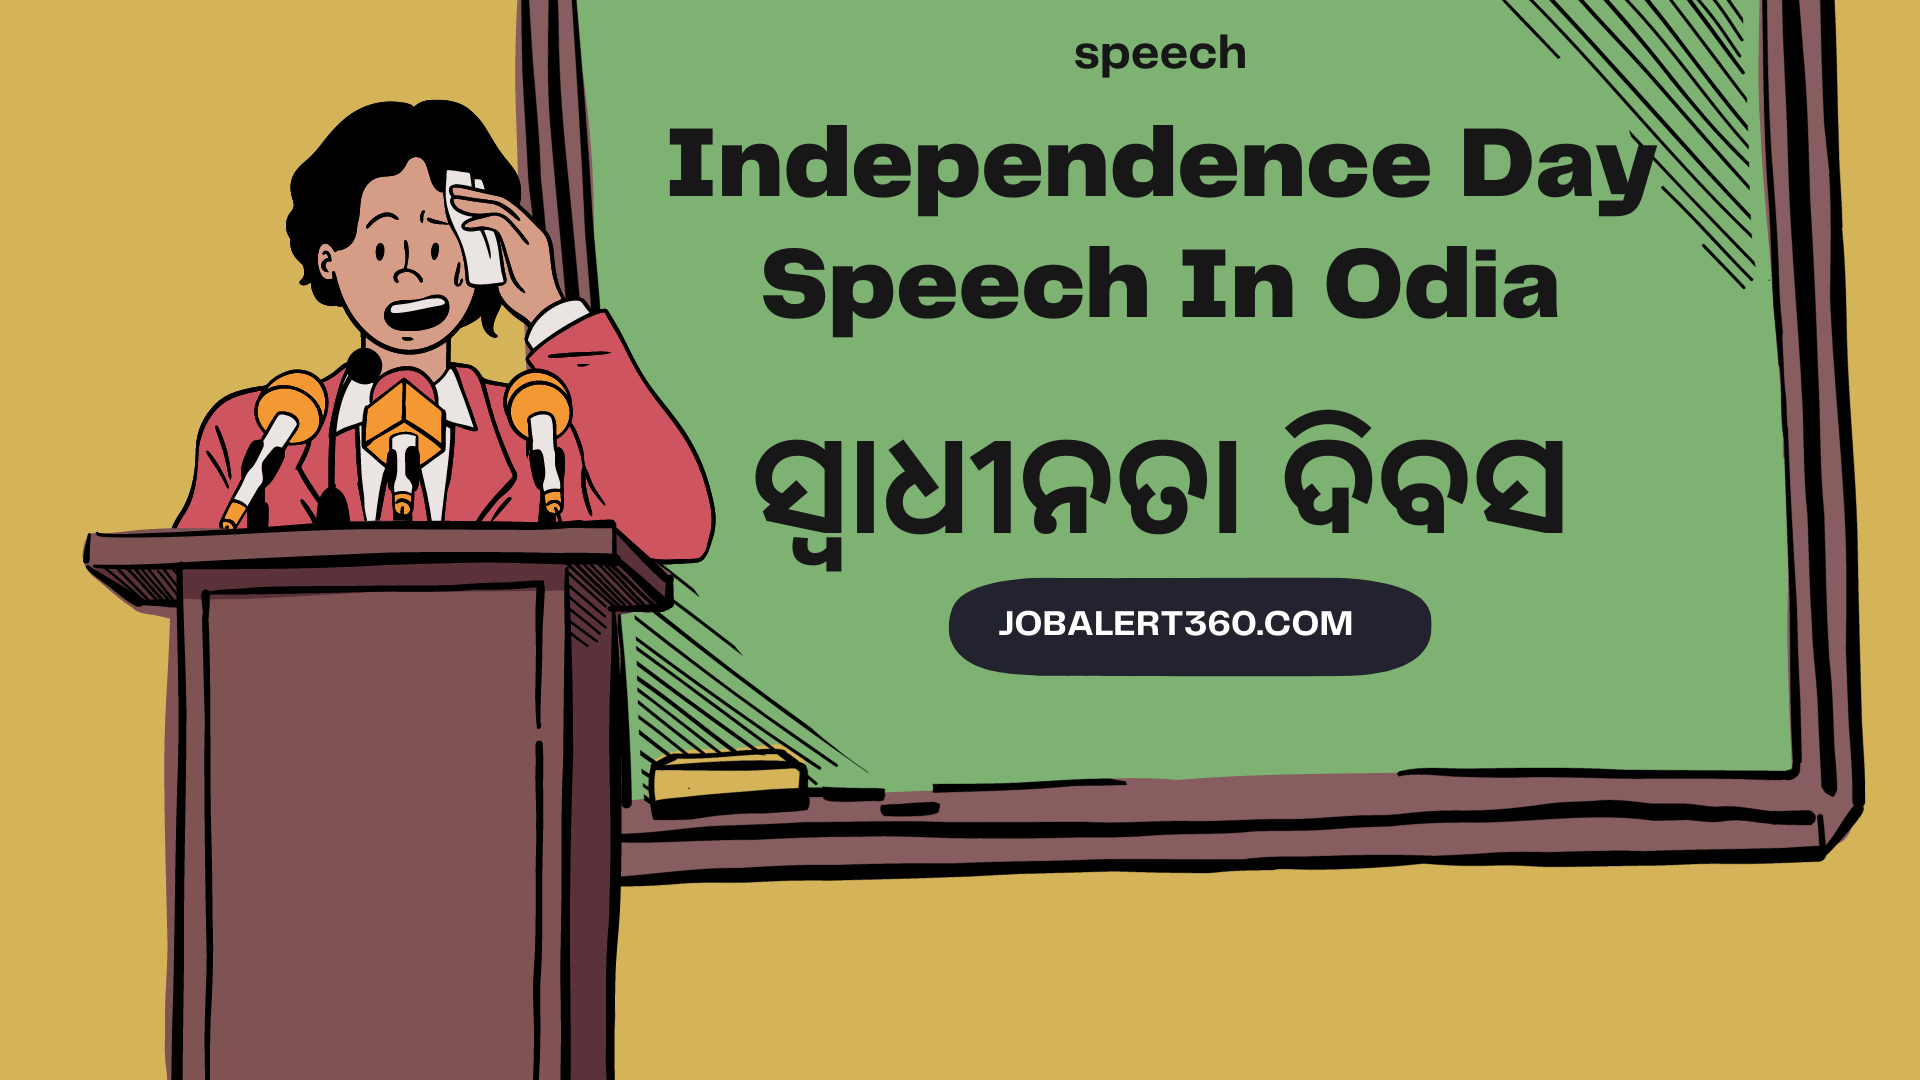 Independence Day Speech In Odia